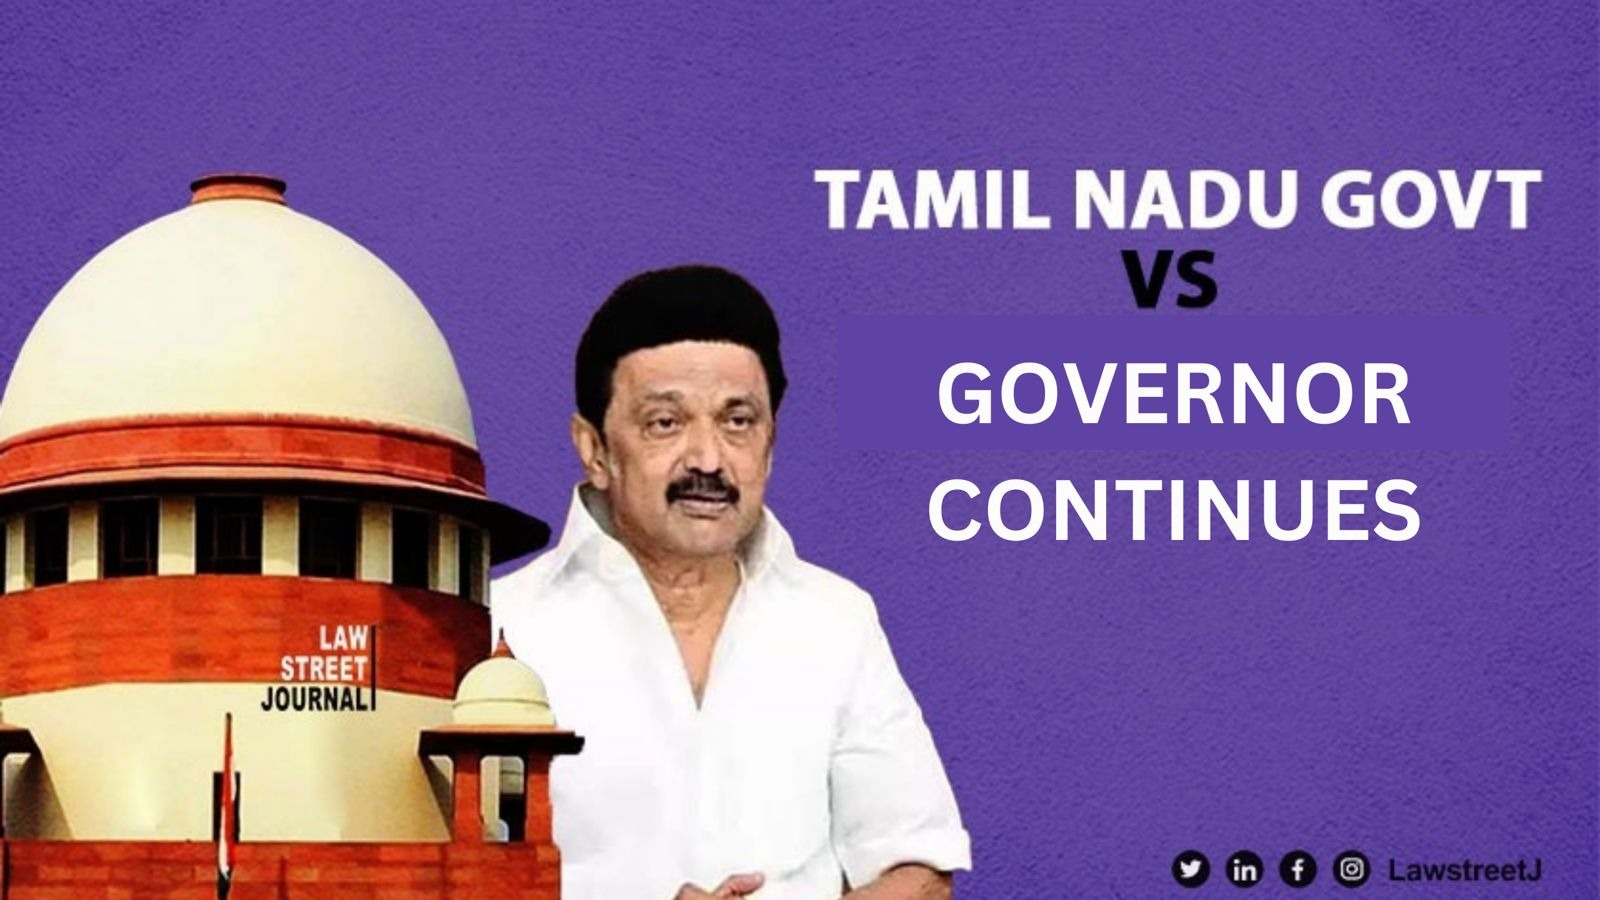 Governor positioned himself as political rival TN govt files plea in SC against delay in assenting bills